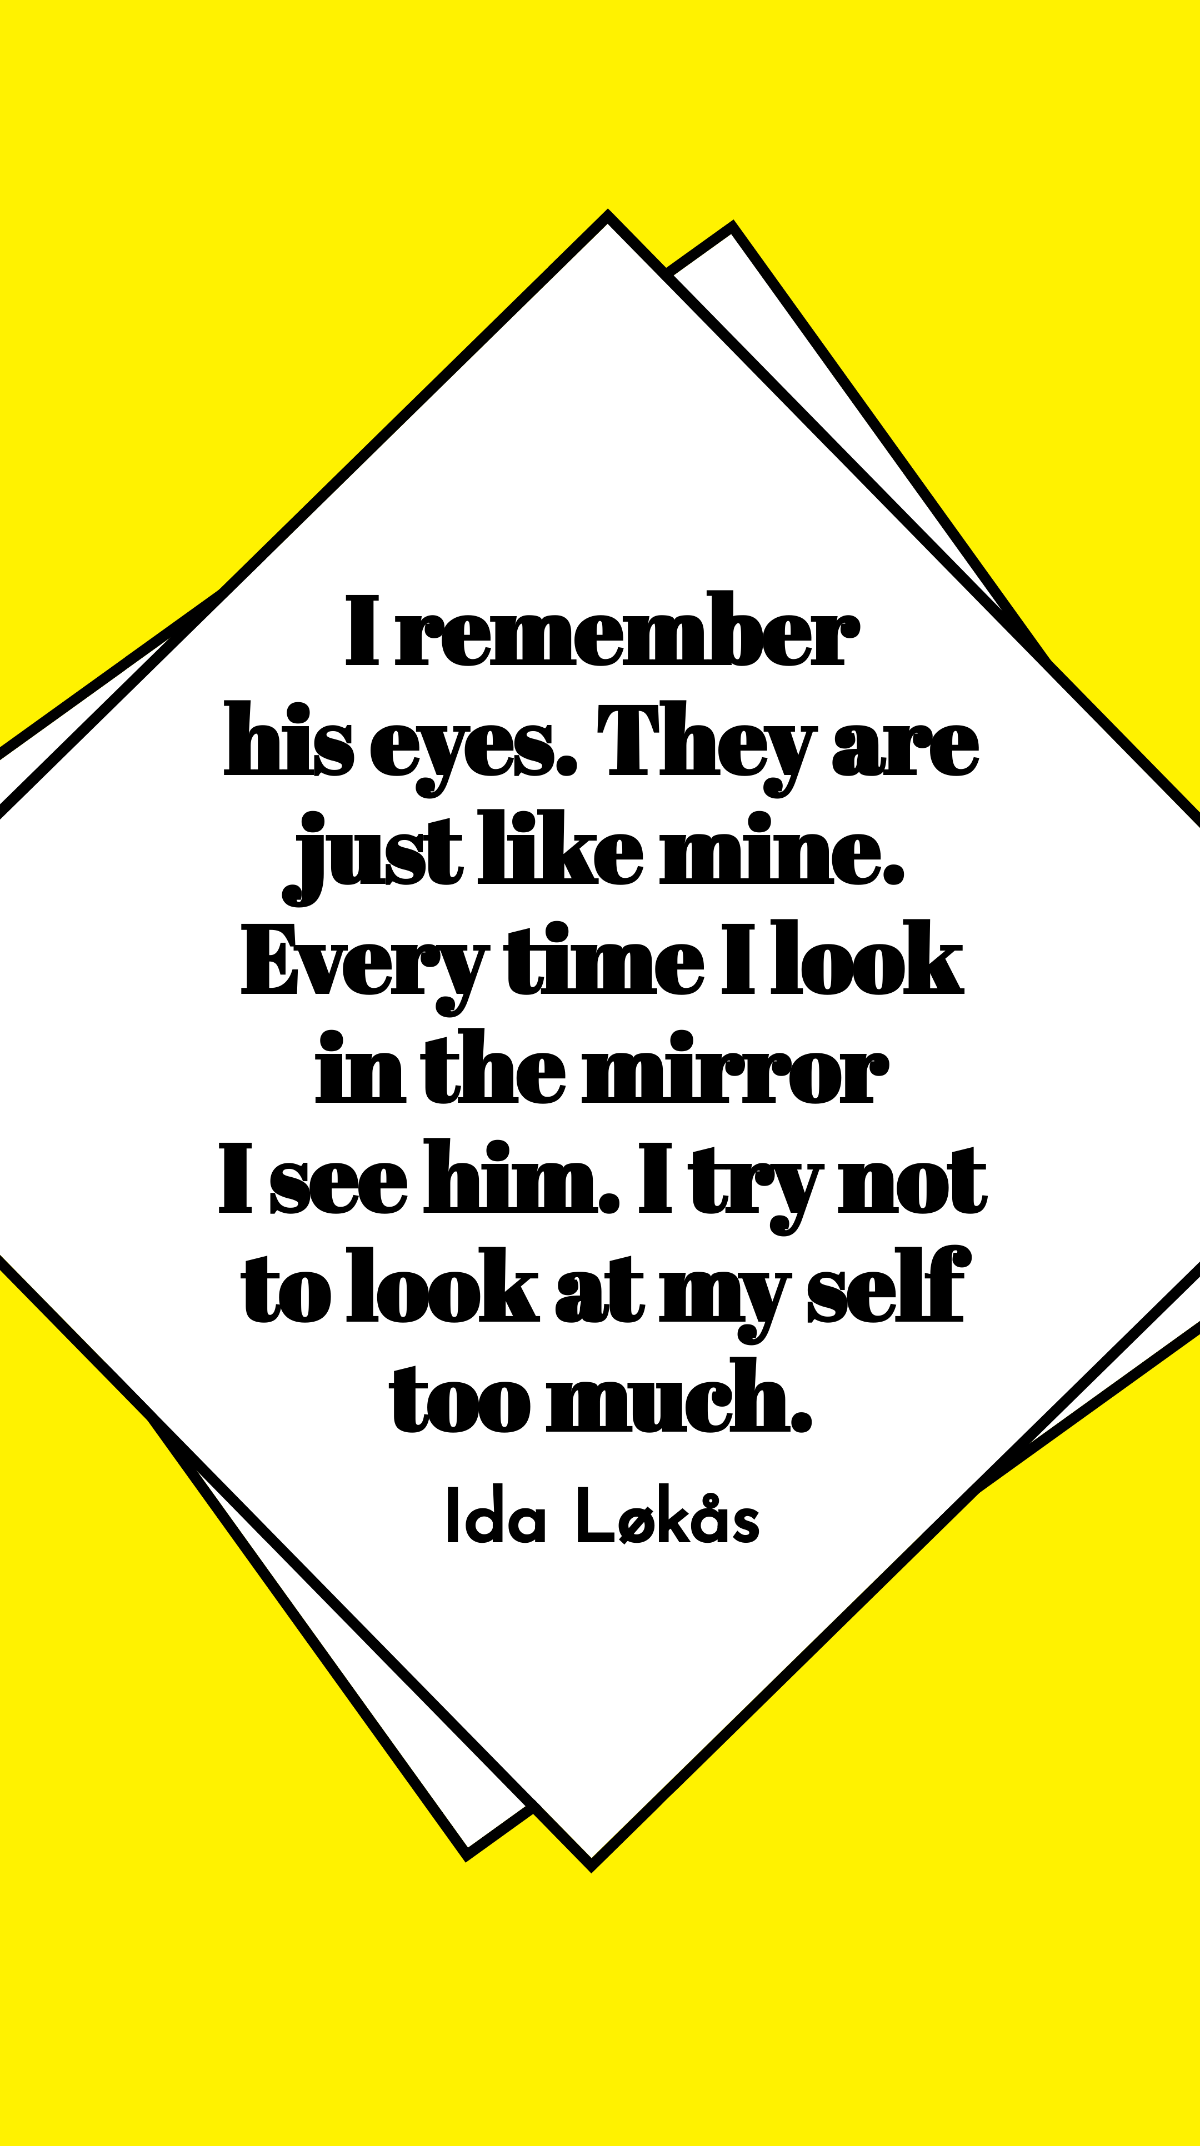 Ida Løkås - I remember his eyes. They are just like mine. Every time I look in the mirror I see him. I try not to look at my self too much. Template